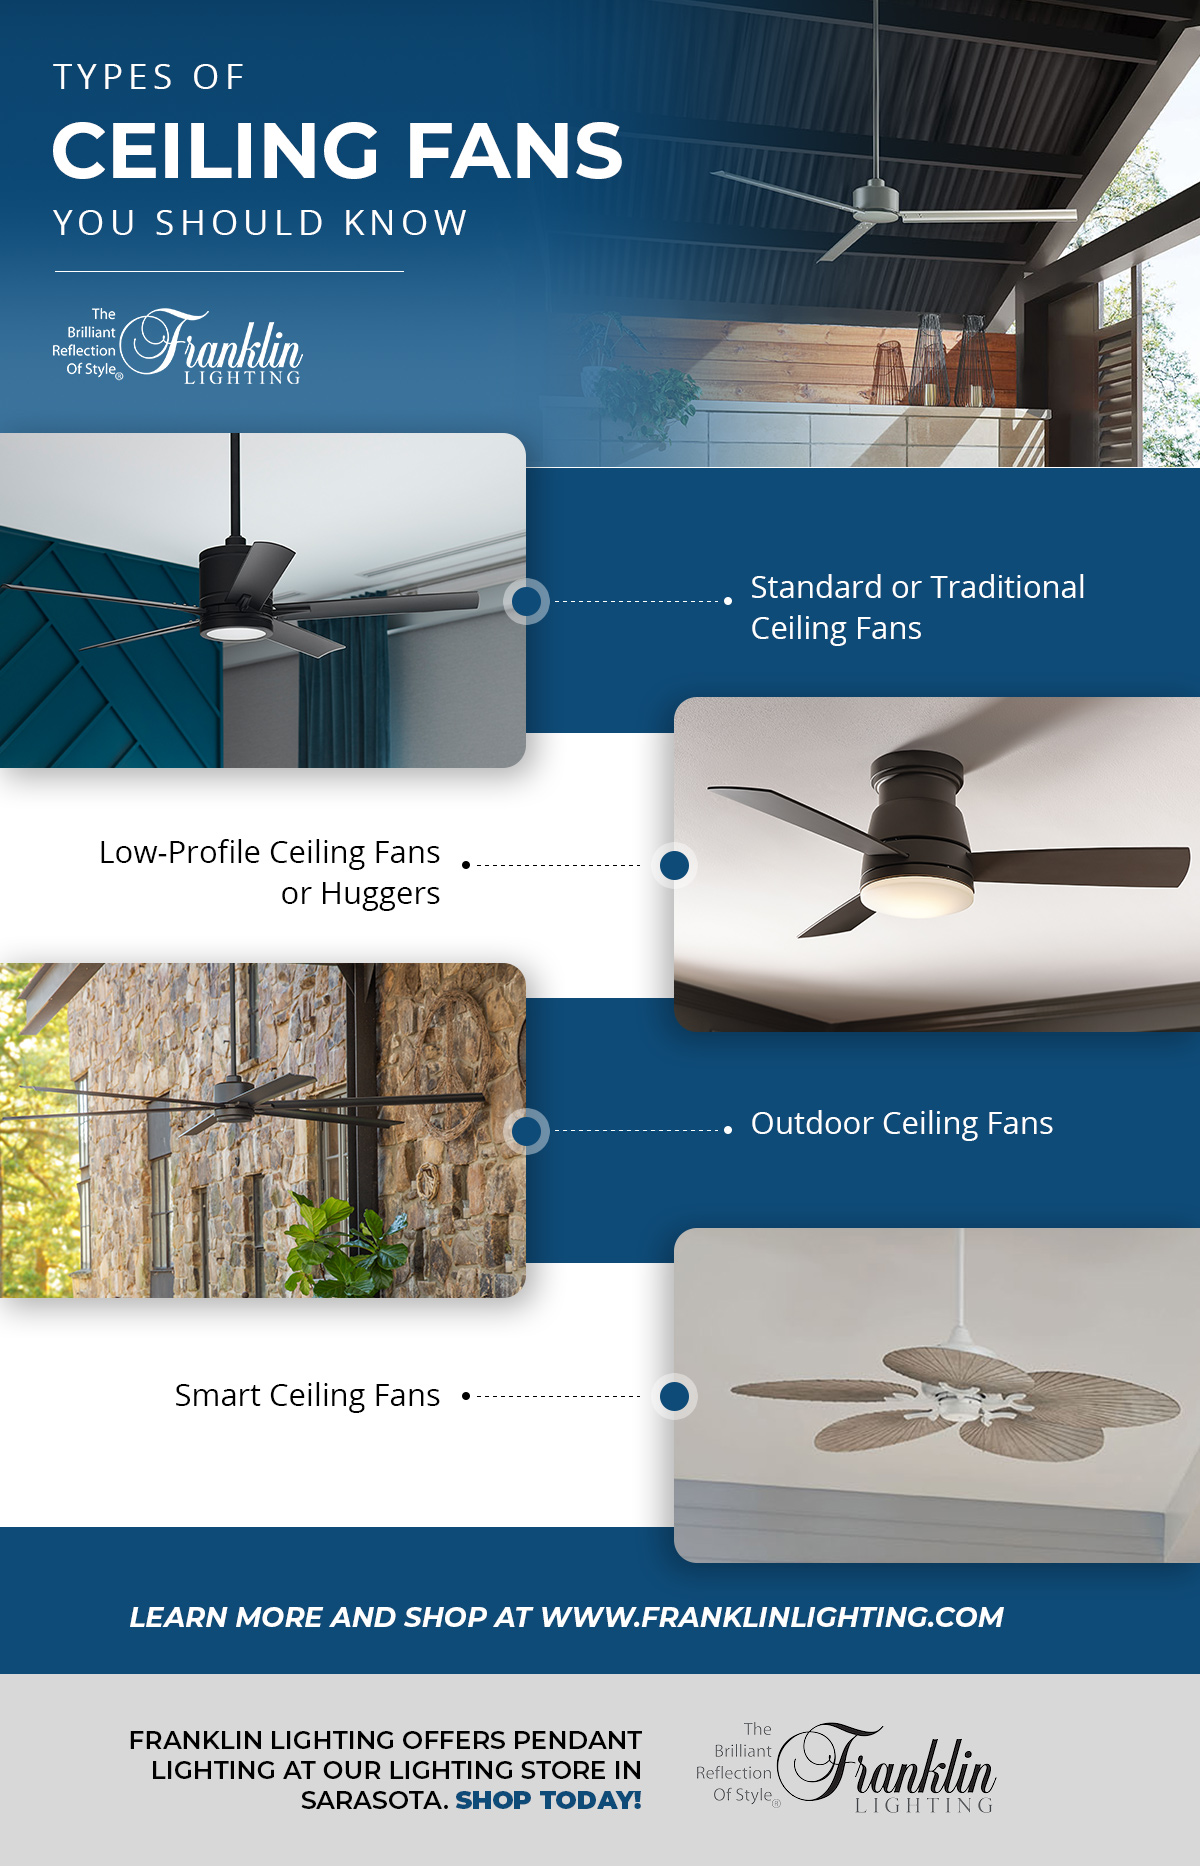 Types-of-Ceiling-Fans-You-Should-Know-franklin-lighting-infographic-6266e3b346a89